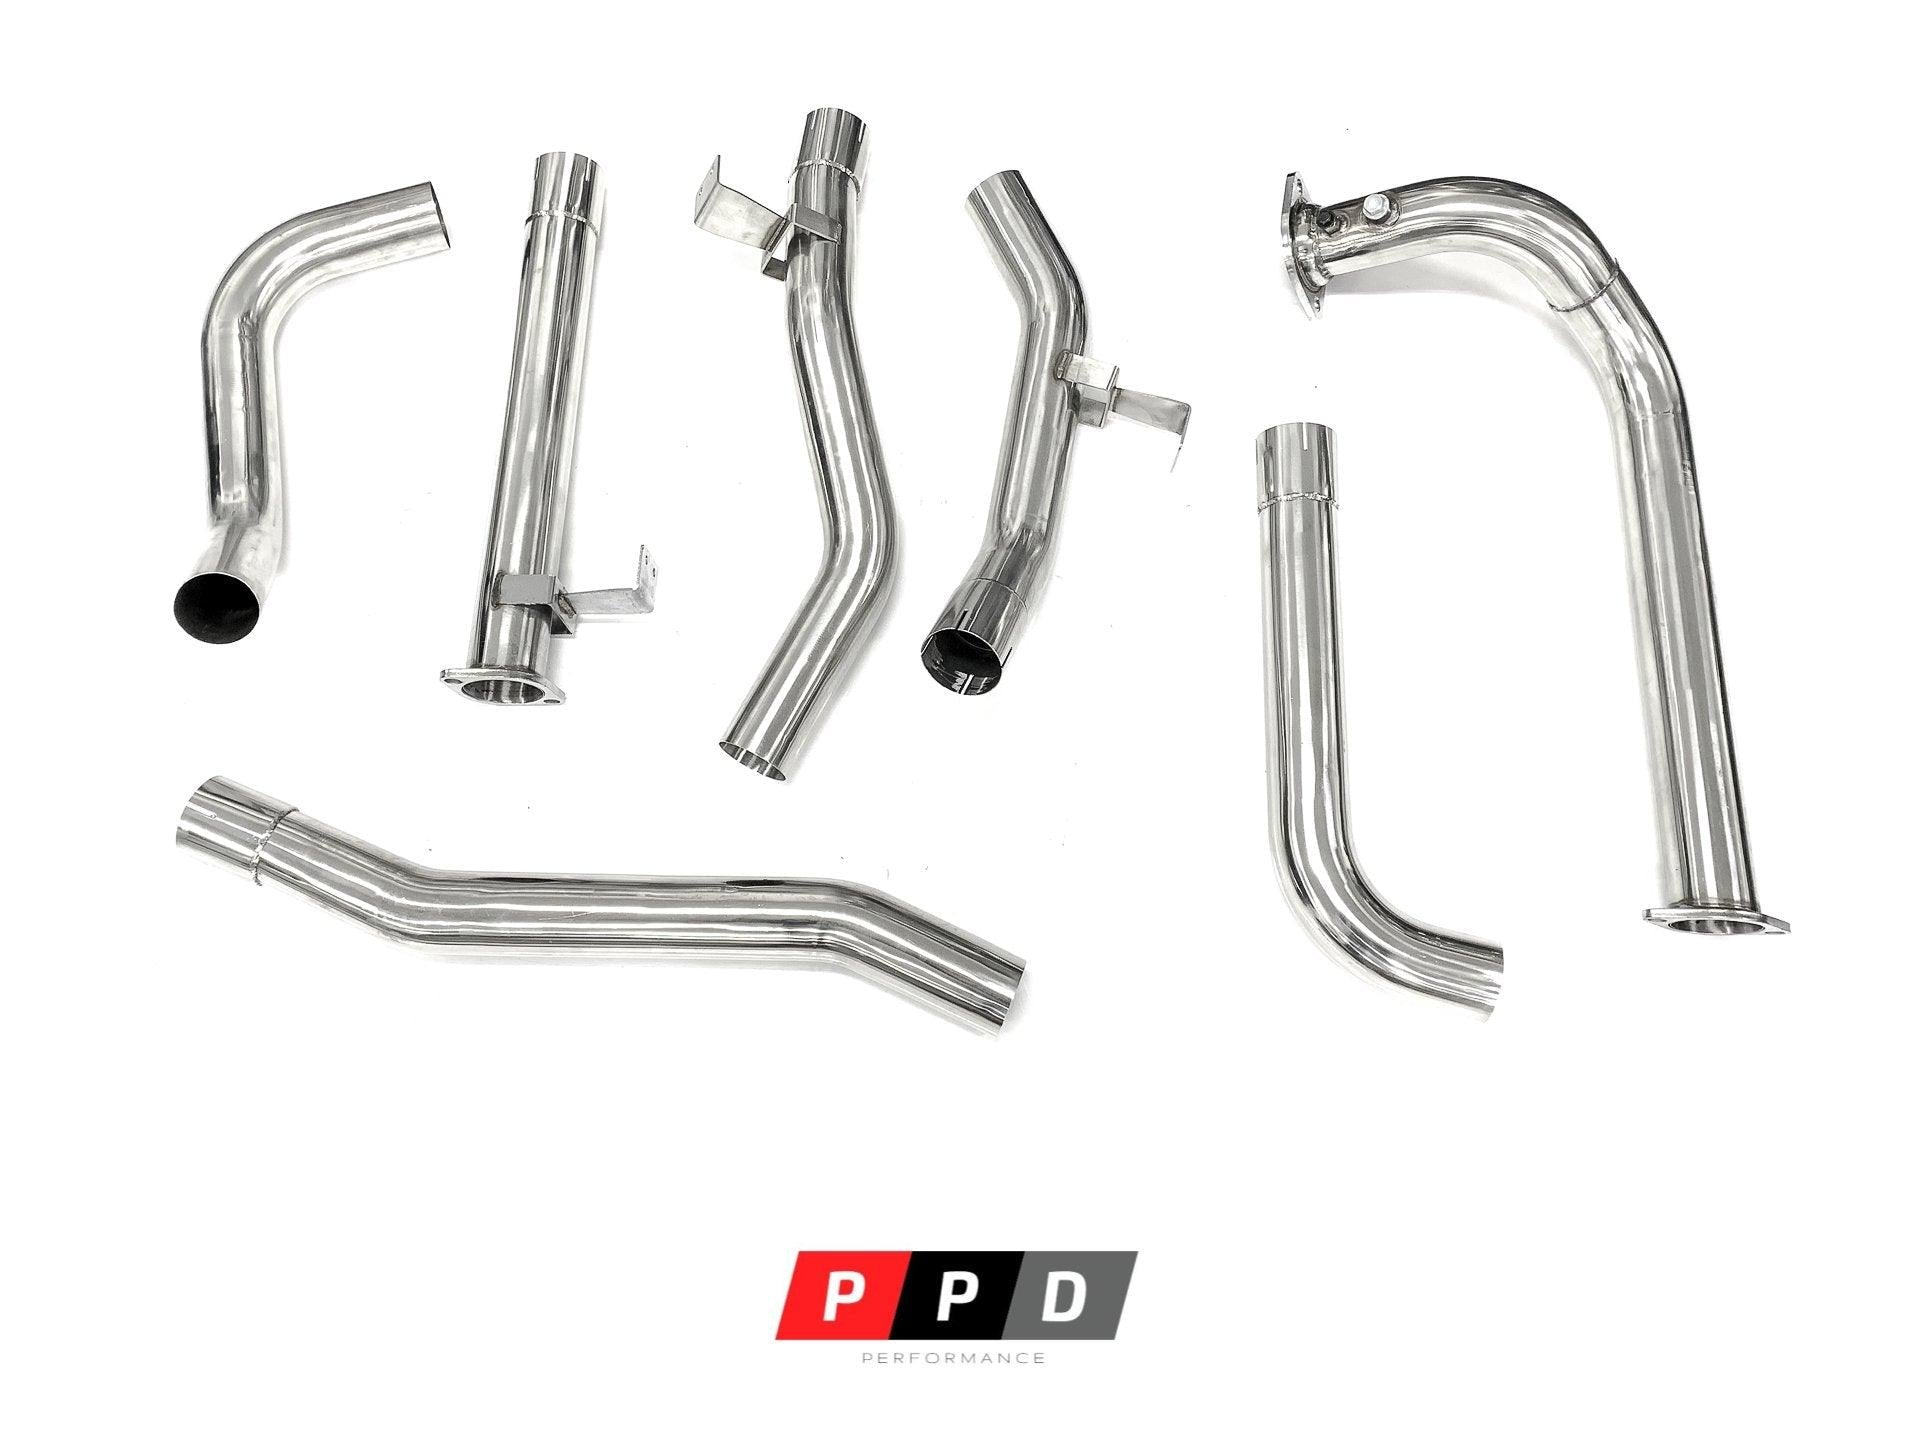 PPD Performance - Toyota Landcruiser 78 Series (1999-2007) Troop carrier 1HD 4.2 TD 3" Stainless Steel Turbo Back Exhaust - 4X4OC™